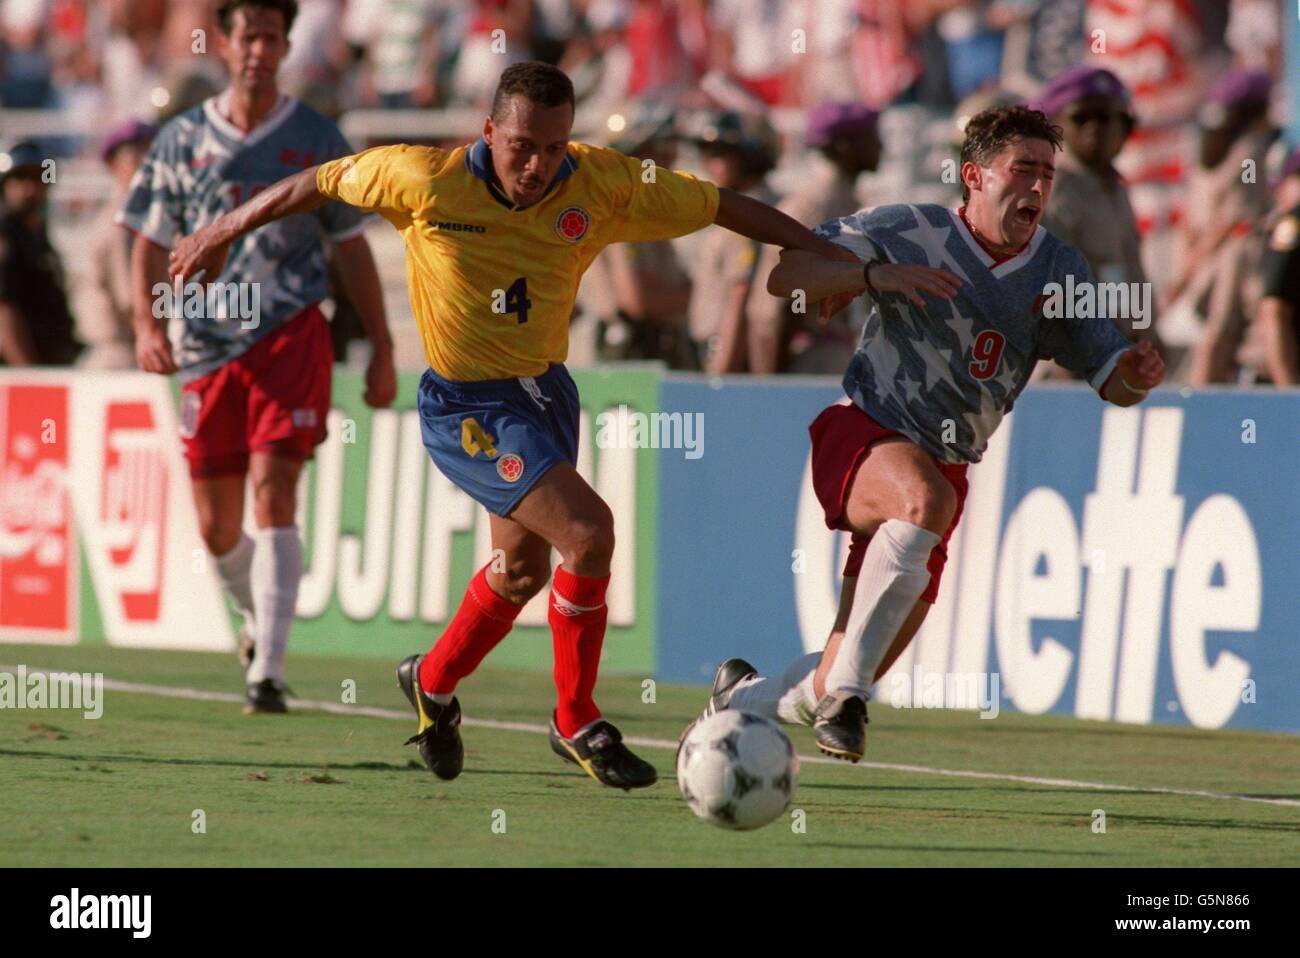 Soccer - World Cup USA 94 - Group A - USA v Colombia. USA's Tab Ramos is pushed off the ball by Colombia's Luis Enrique Herrea Stock Photo